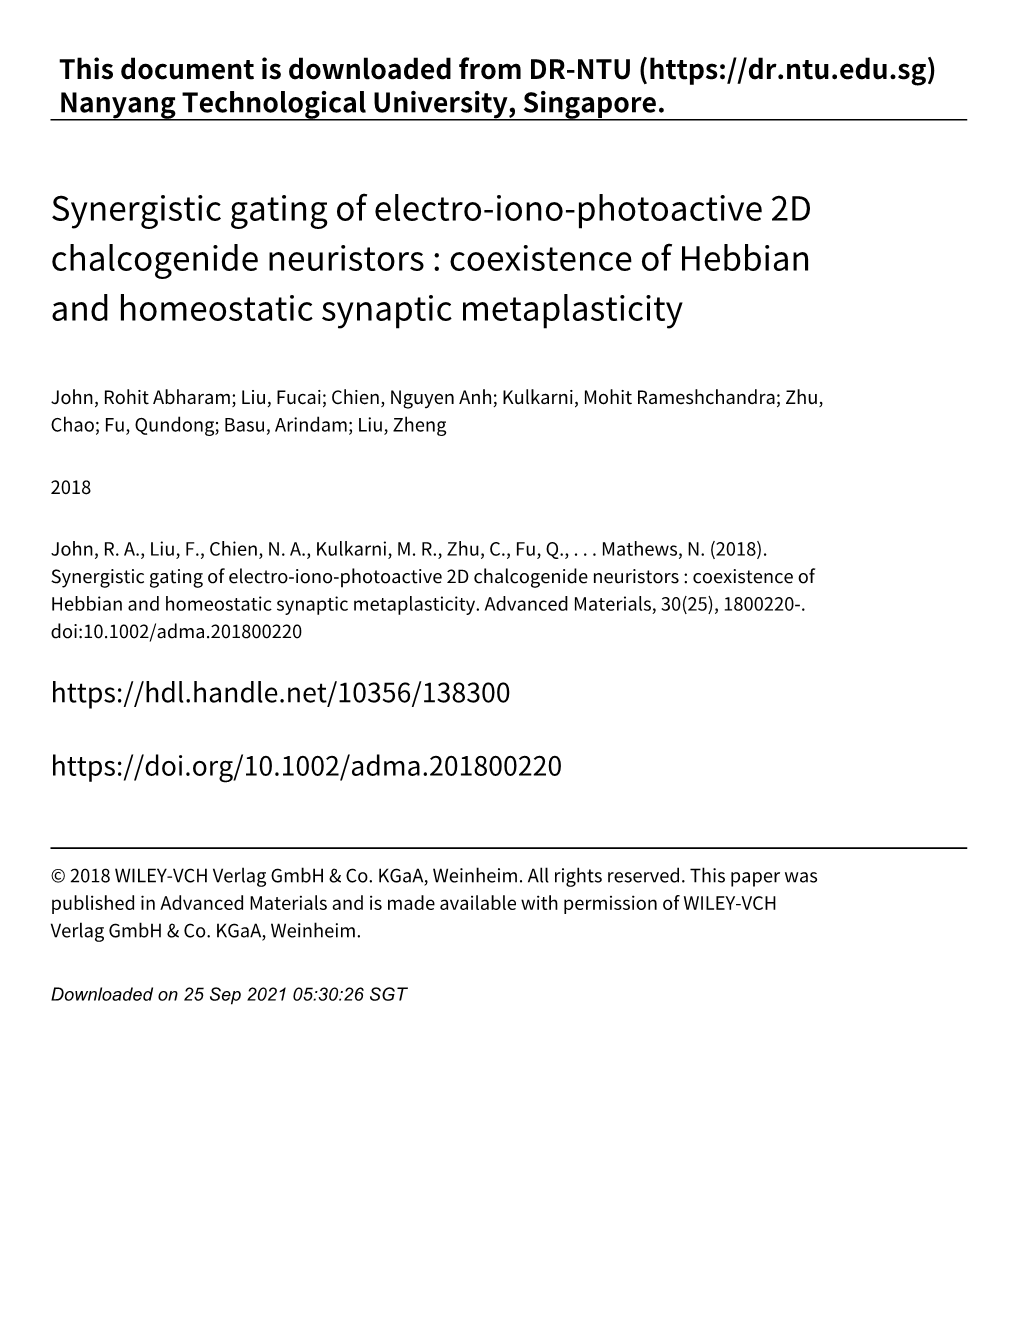 Synergistic Gating of Electro‑Iono‑Photoactive 2D Chalcogenide Neuristors : Coexistence of Hebbian and Homeostatic Synaptic Metaplasticity